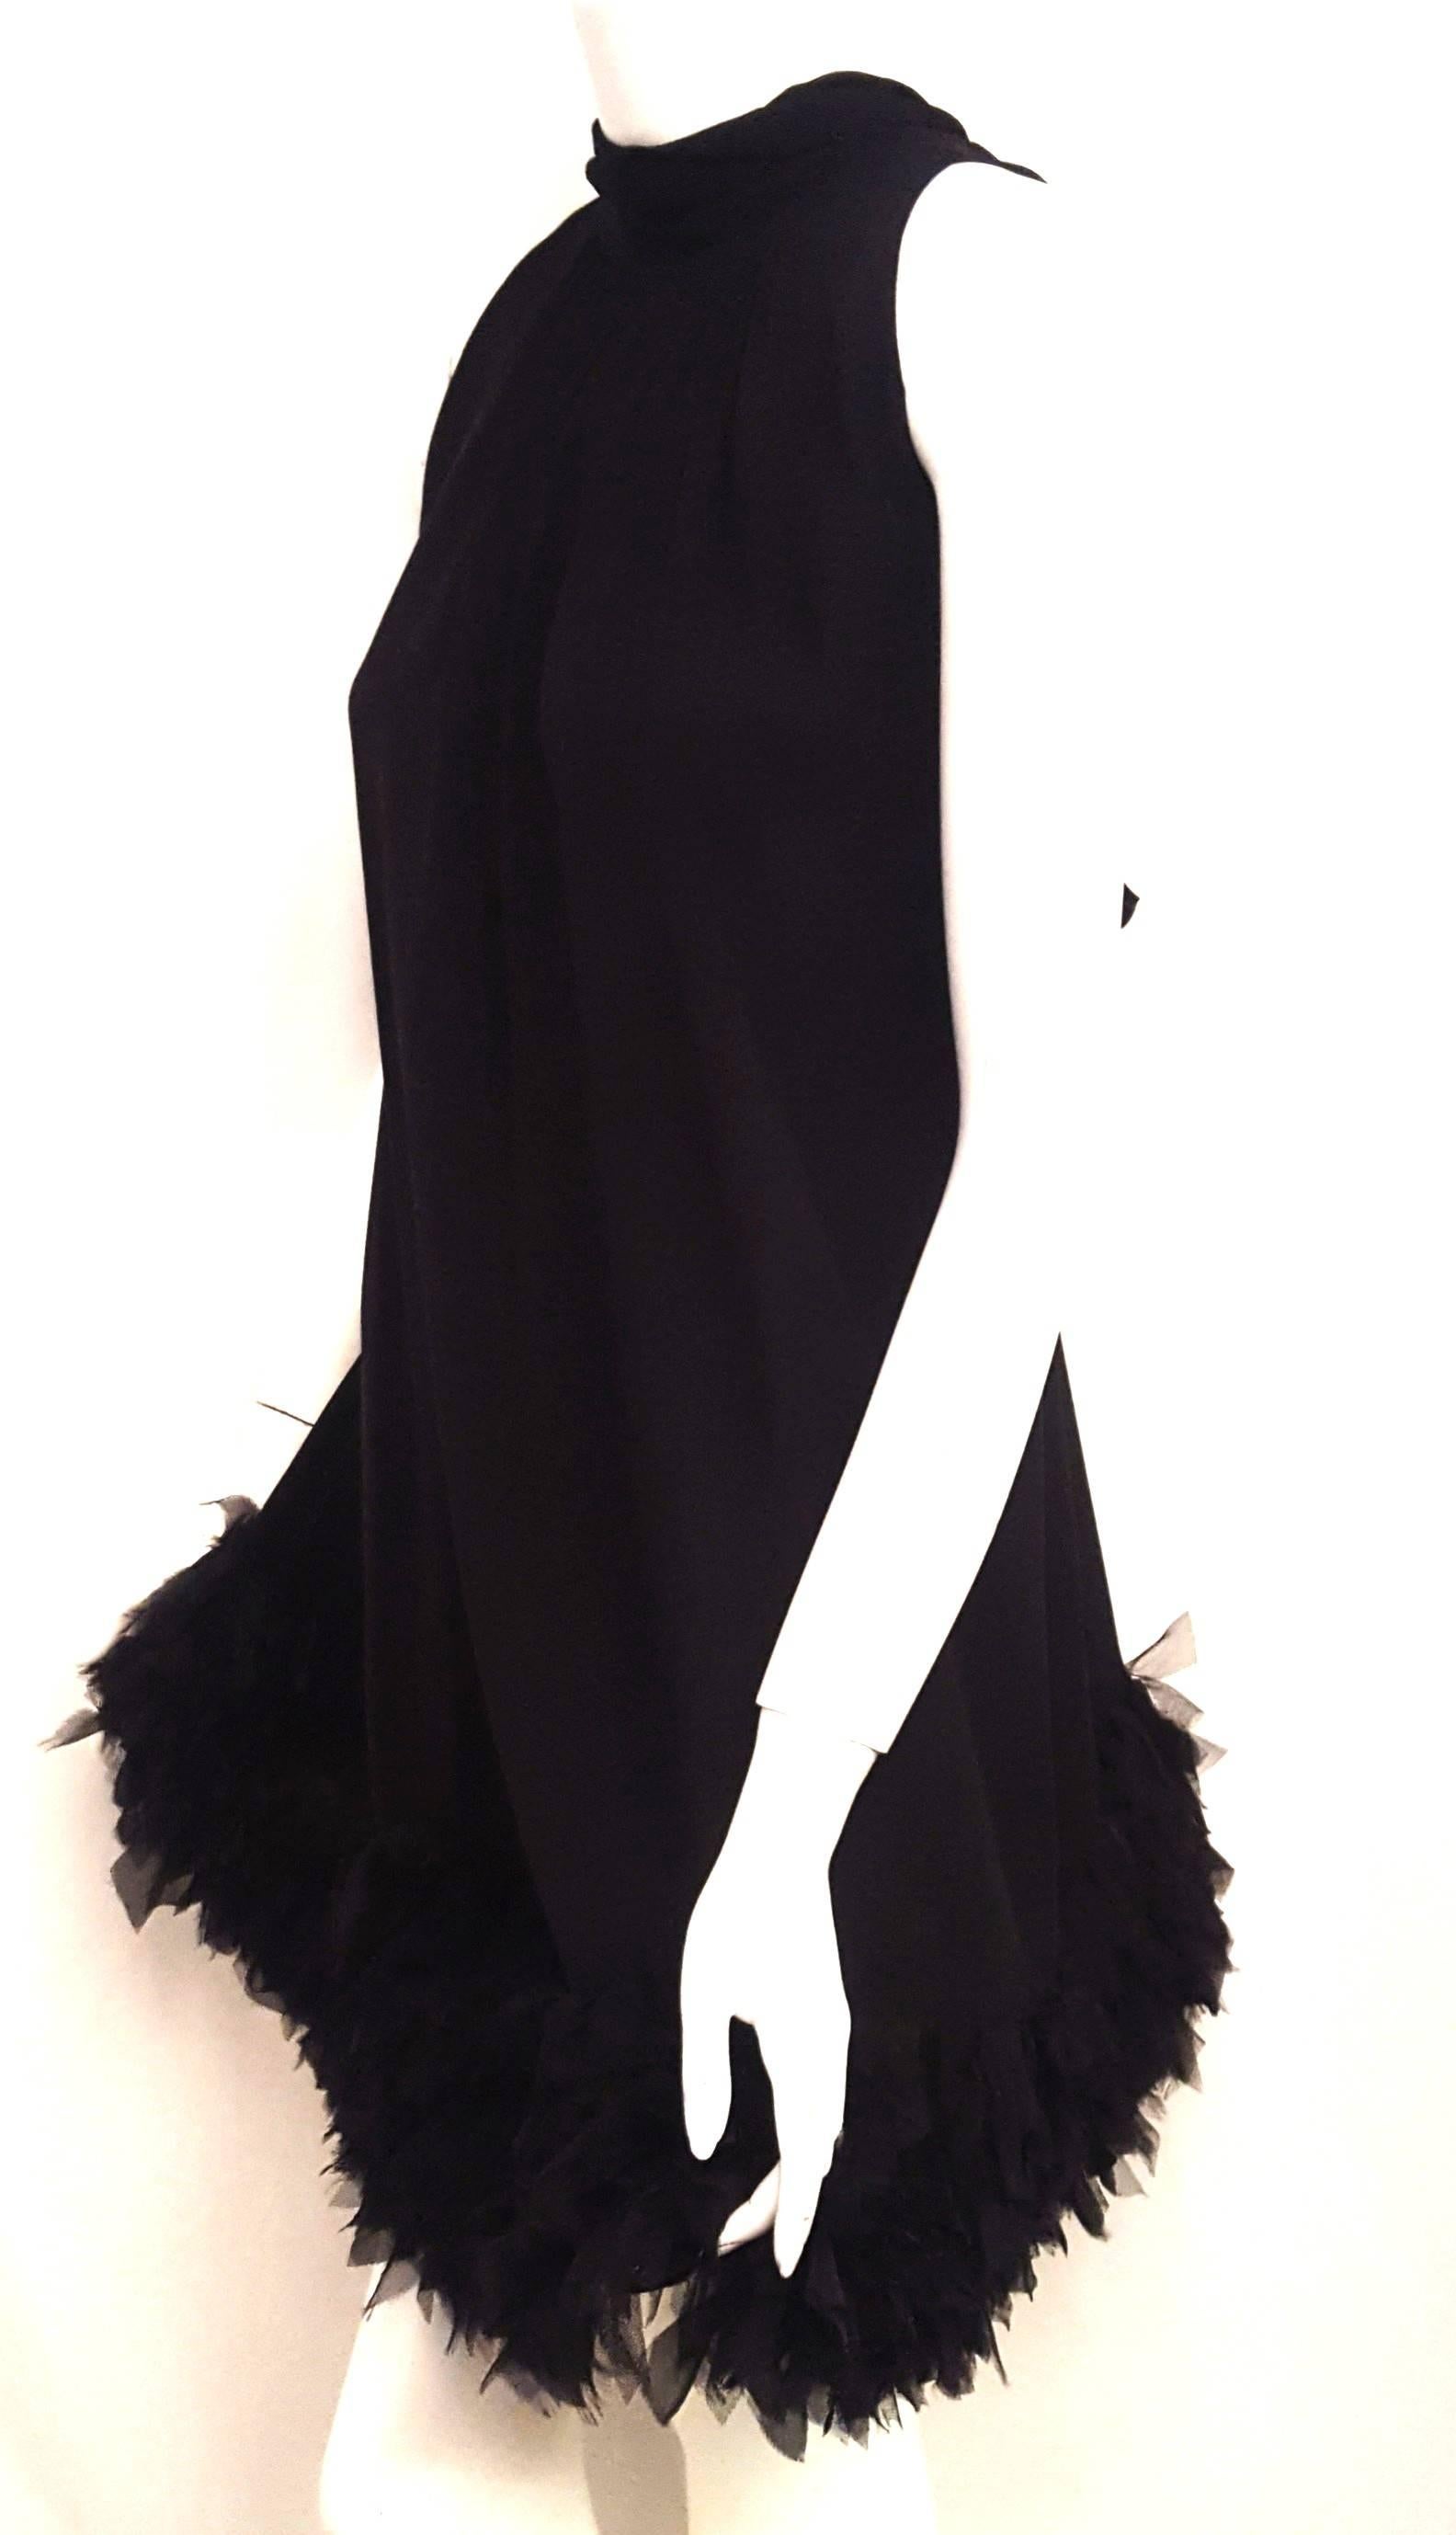 D & G black silk chiffon sleeveless dress with turtleneck style collar with long sashes that tie at back in a bow or can, also, be tied at front to accentuate the feminine look.   This loose fitting flirty dress falls to just below the knee.  The